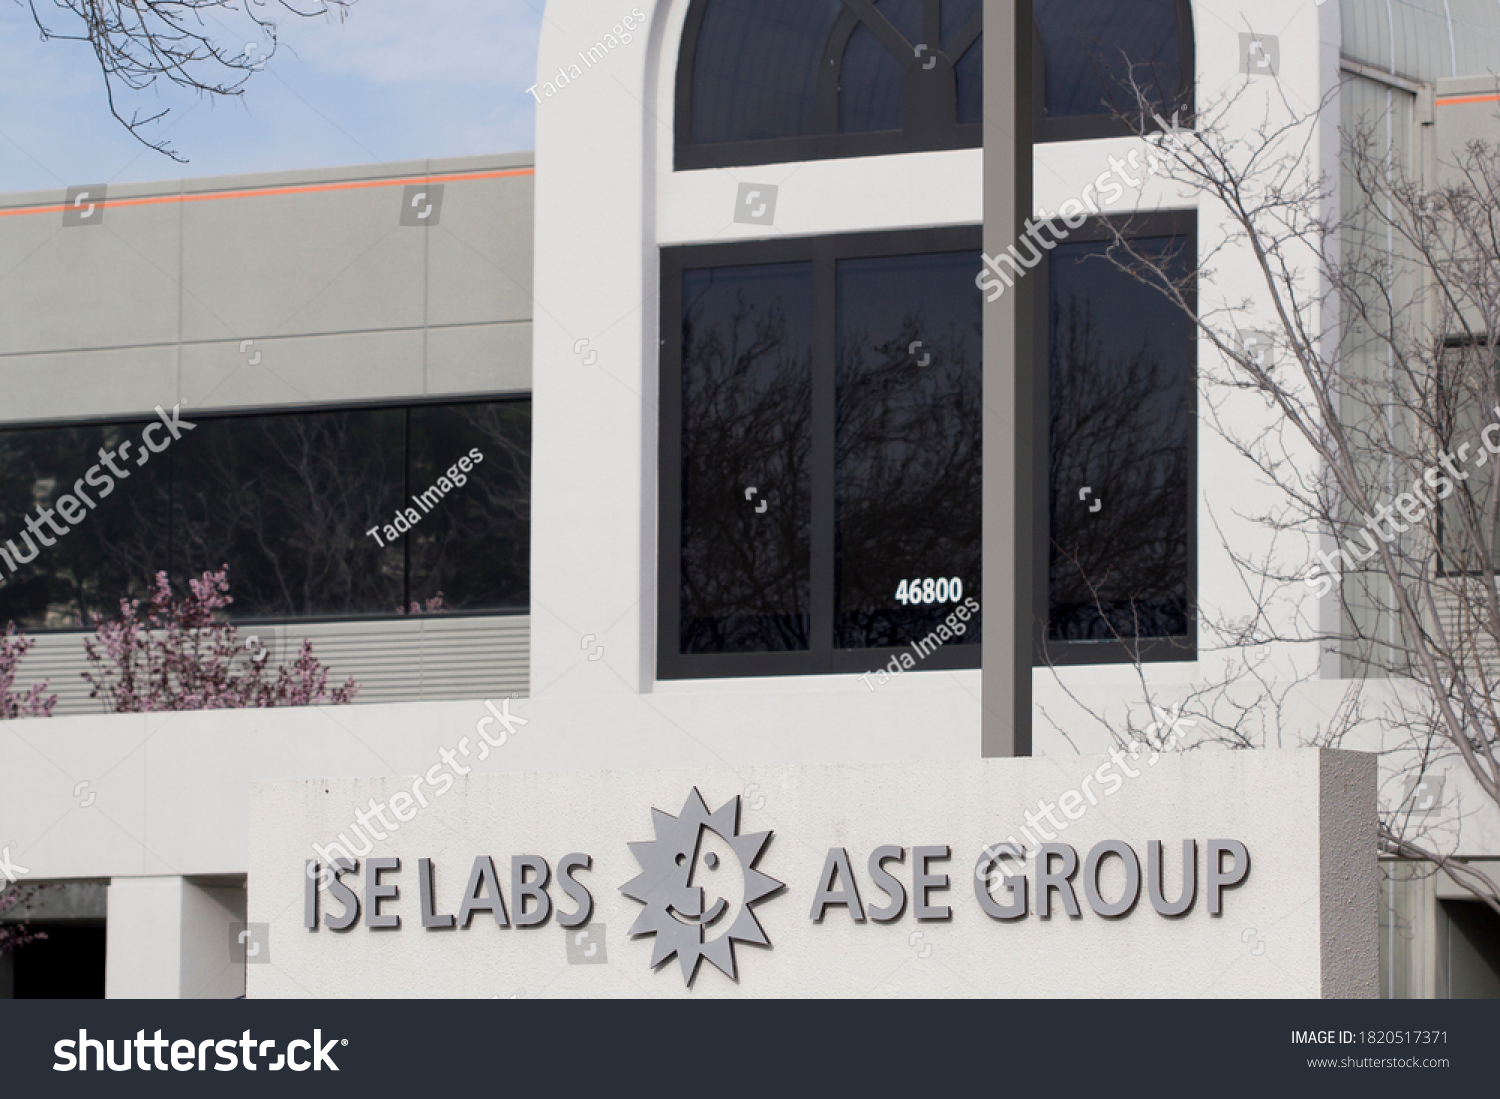 Ase group